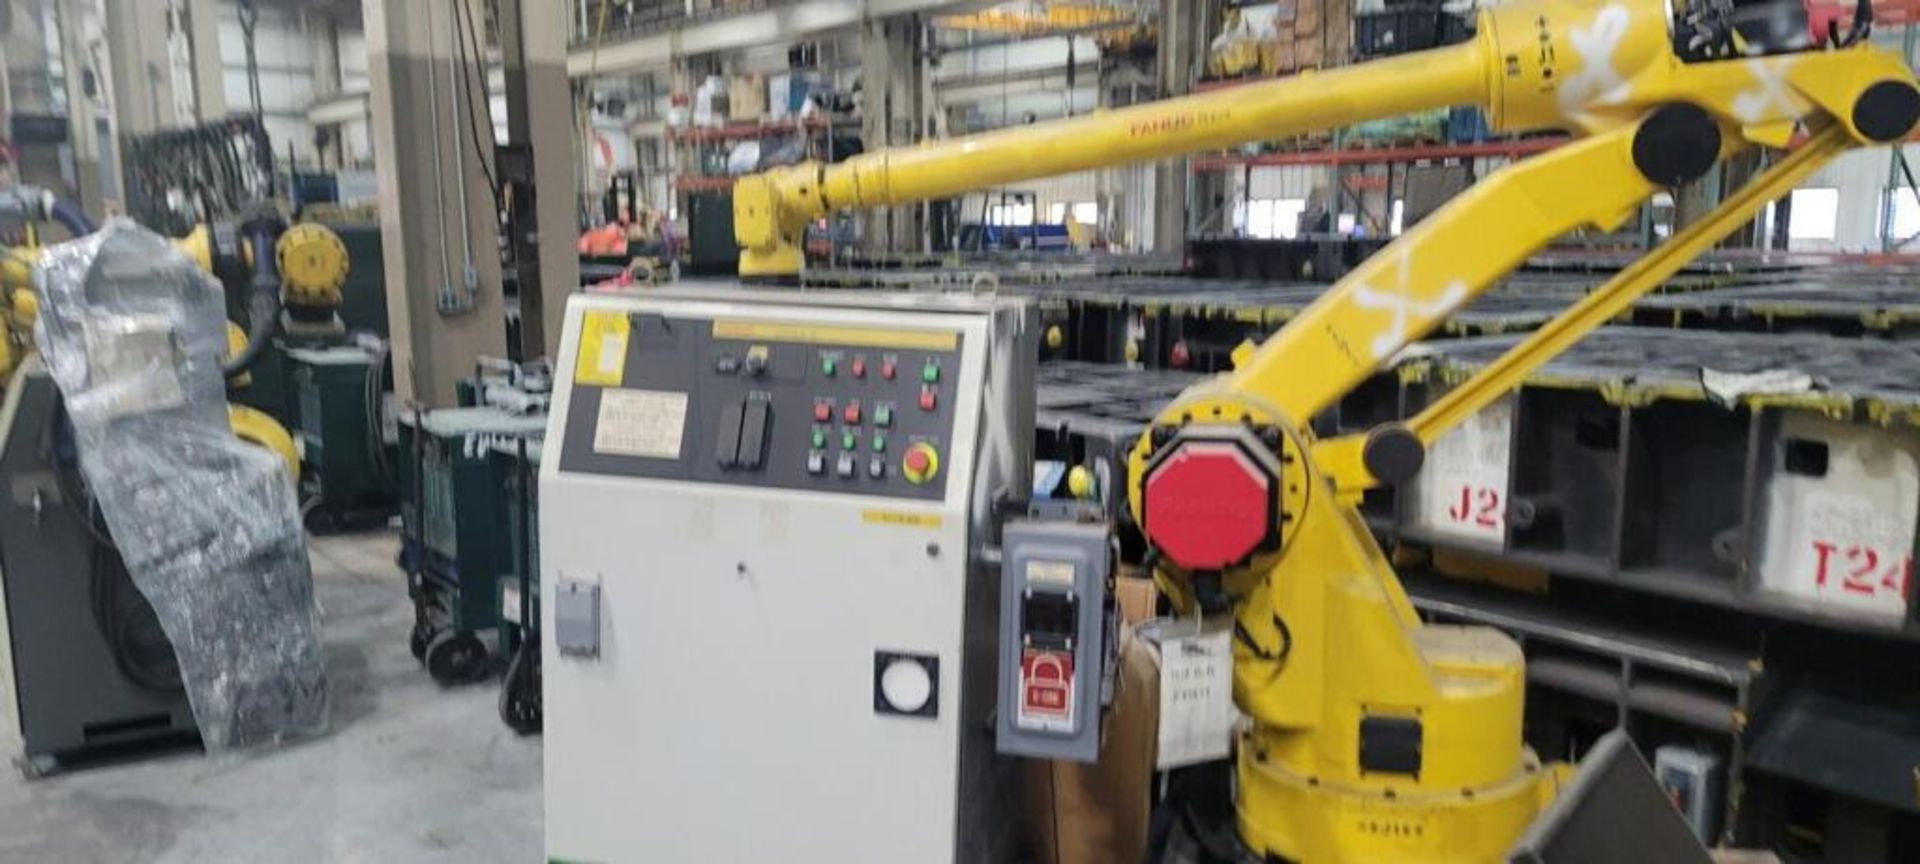 FANUC S500 ROBOT RJ2 CONTROLLER / (RCC Cables, Teach Pendant) / Located At: 37 Murray Dr, Tullahoma,